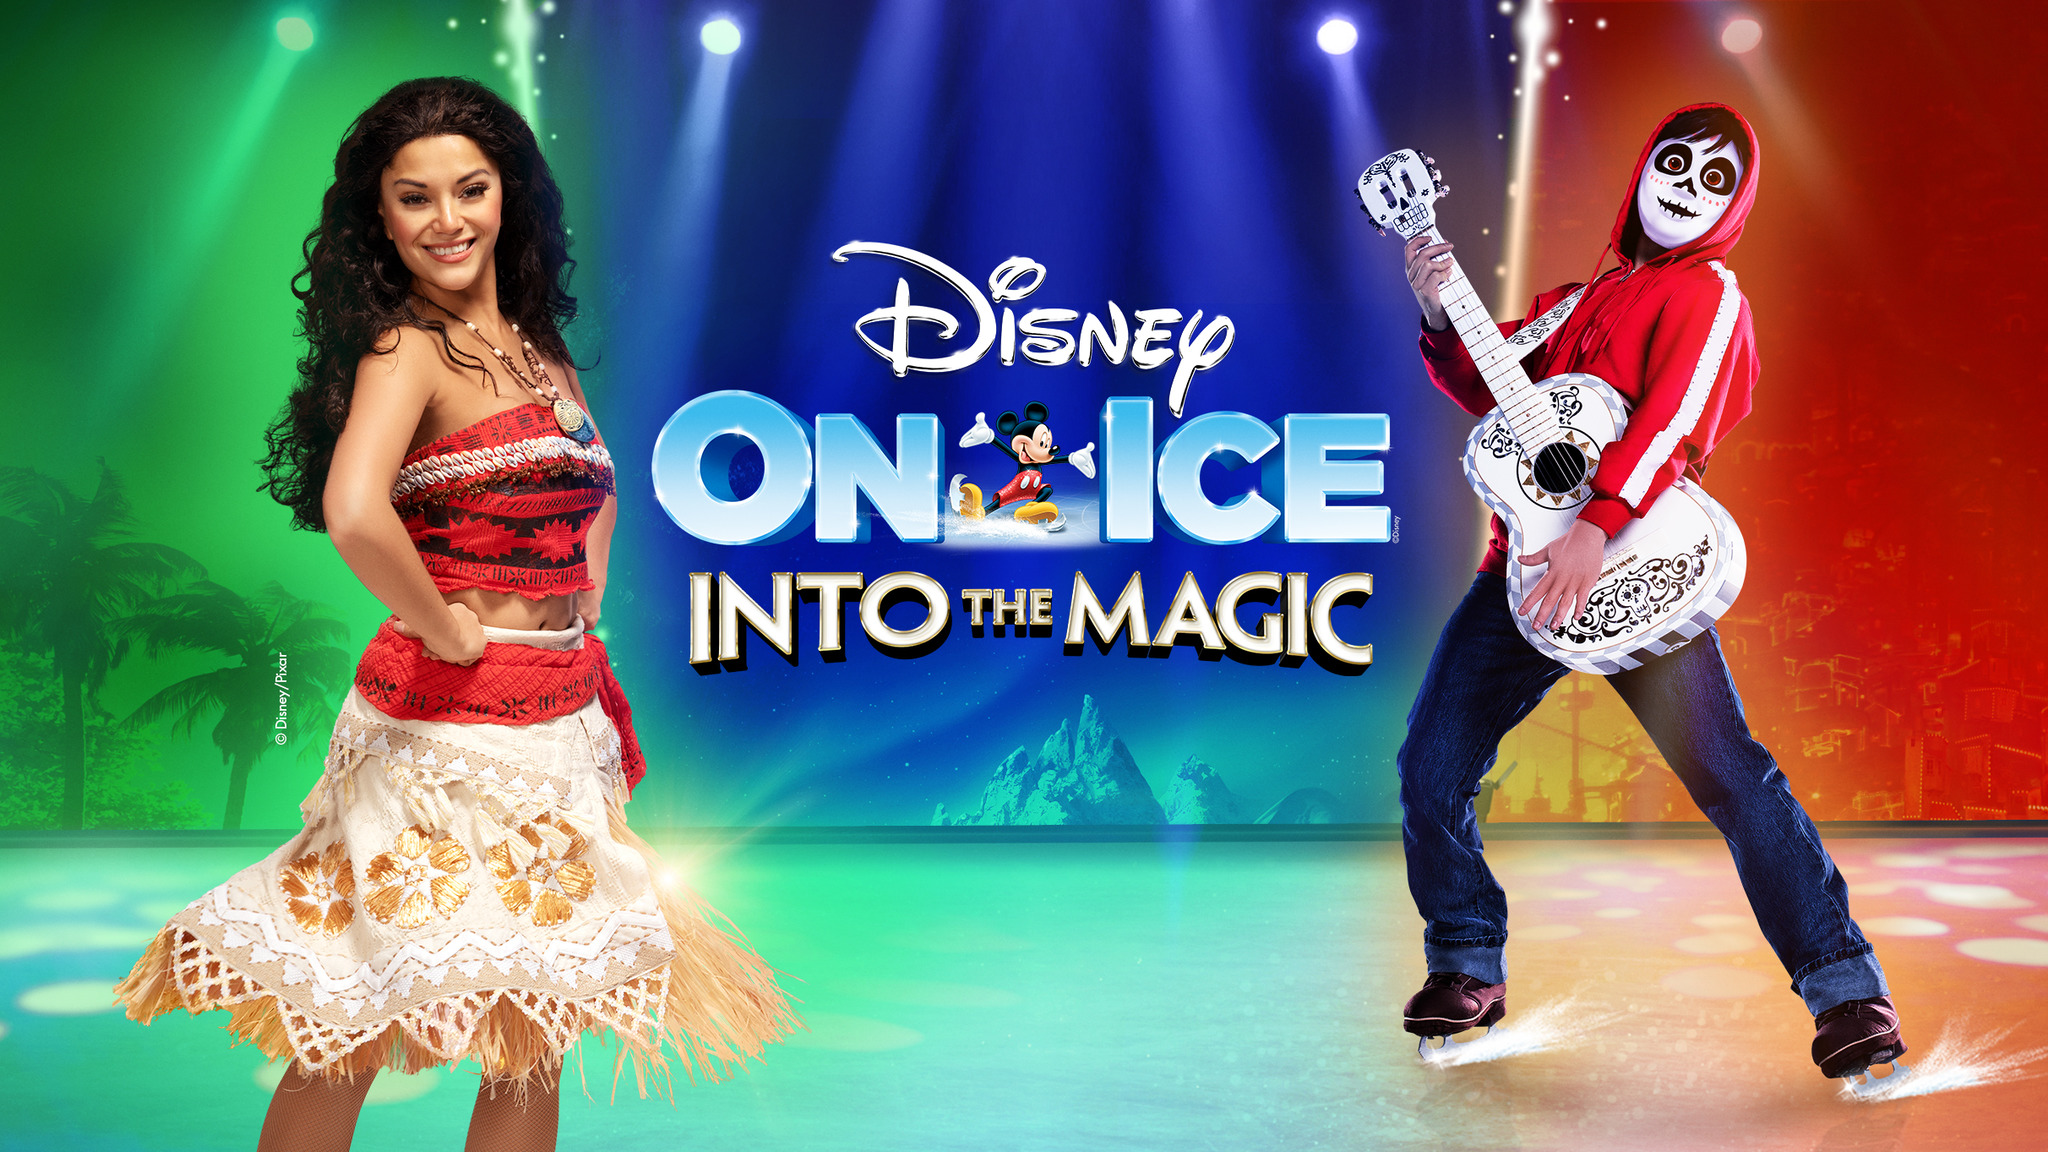 Disney On Ice presents Into the Magic Tickets Event Dates & Schedule